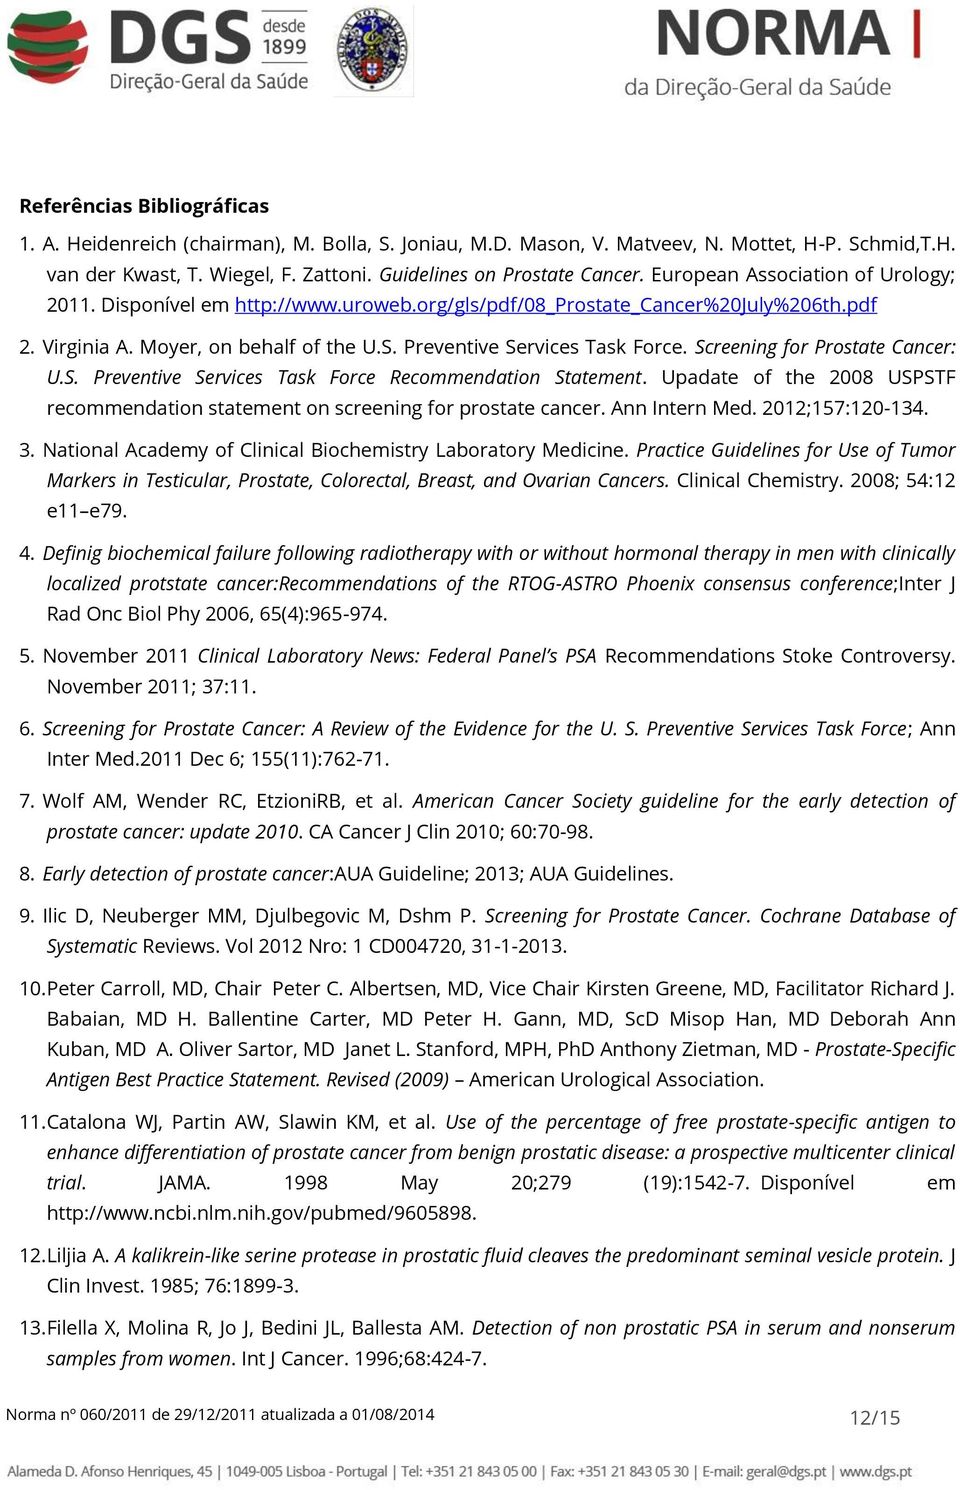 Screening for Prostate Cancer: U.S. Preventive Services Task Force Recommendation Statement. Upadate of the 2008 USPSTF recommendation statement on screening for prostate cancer. Ann Intern Med.